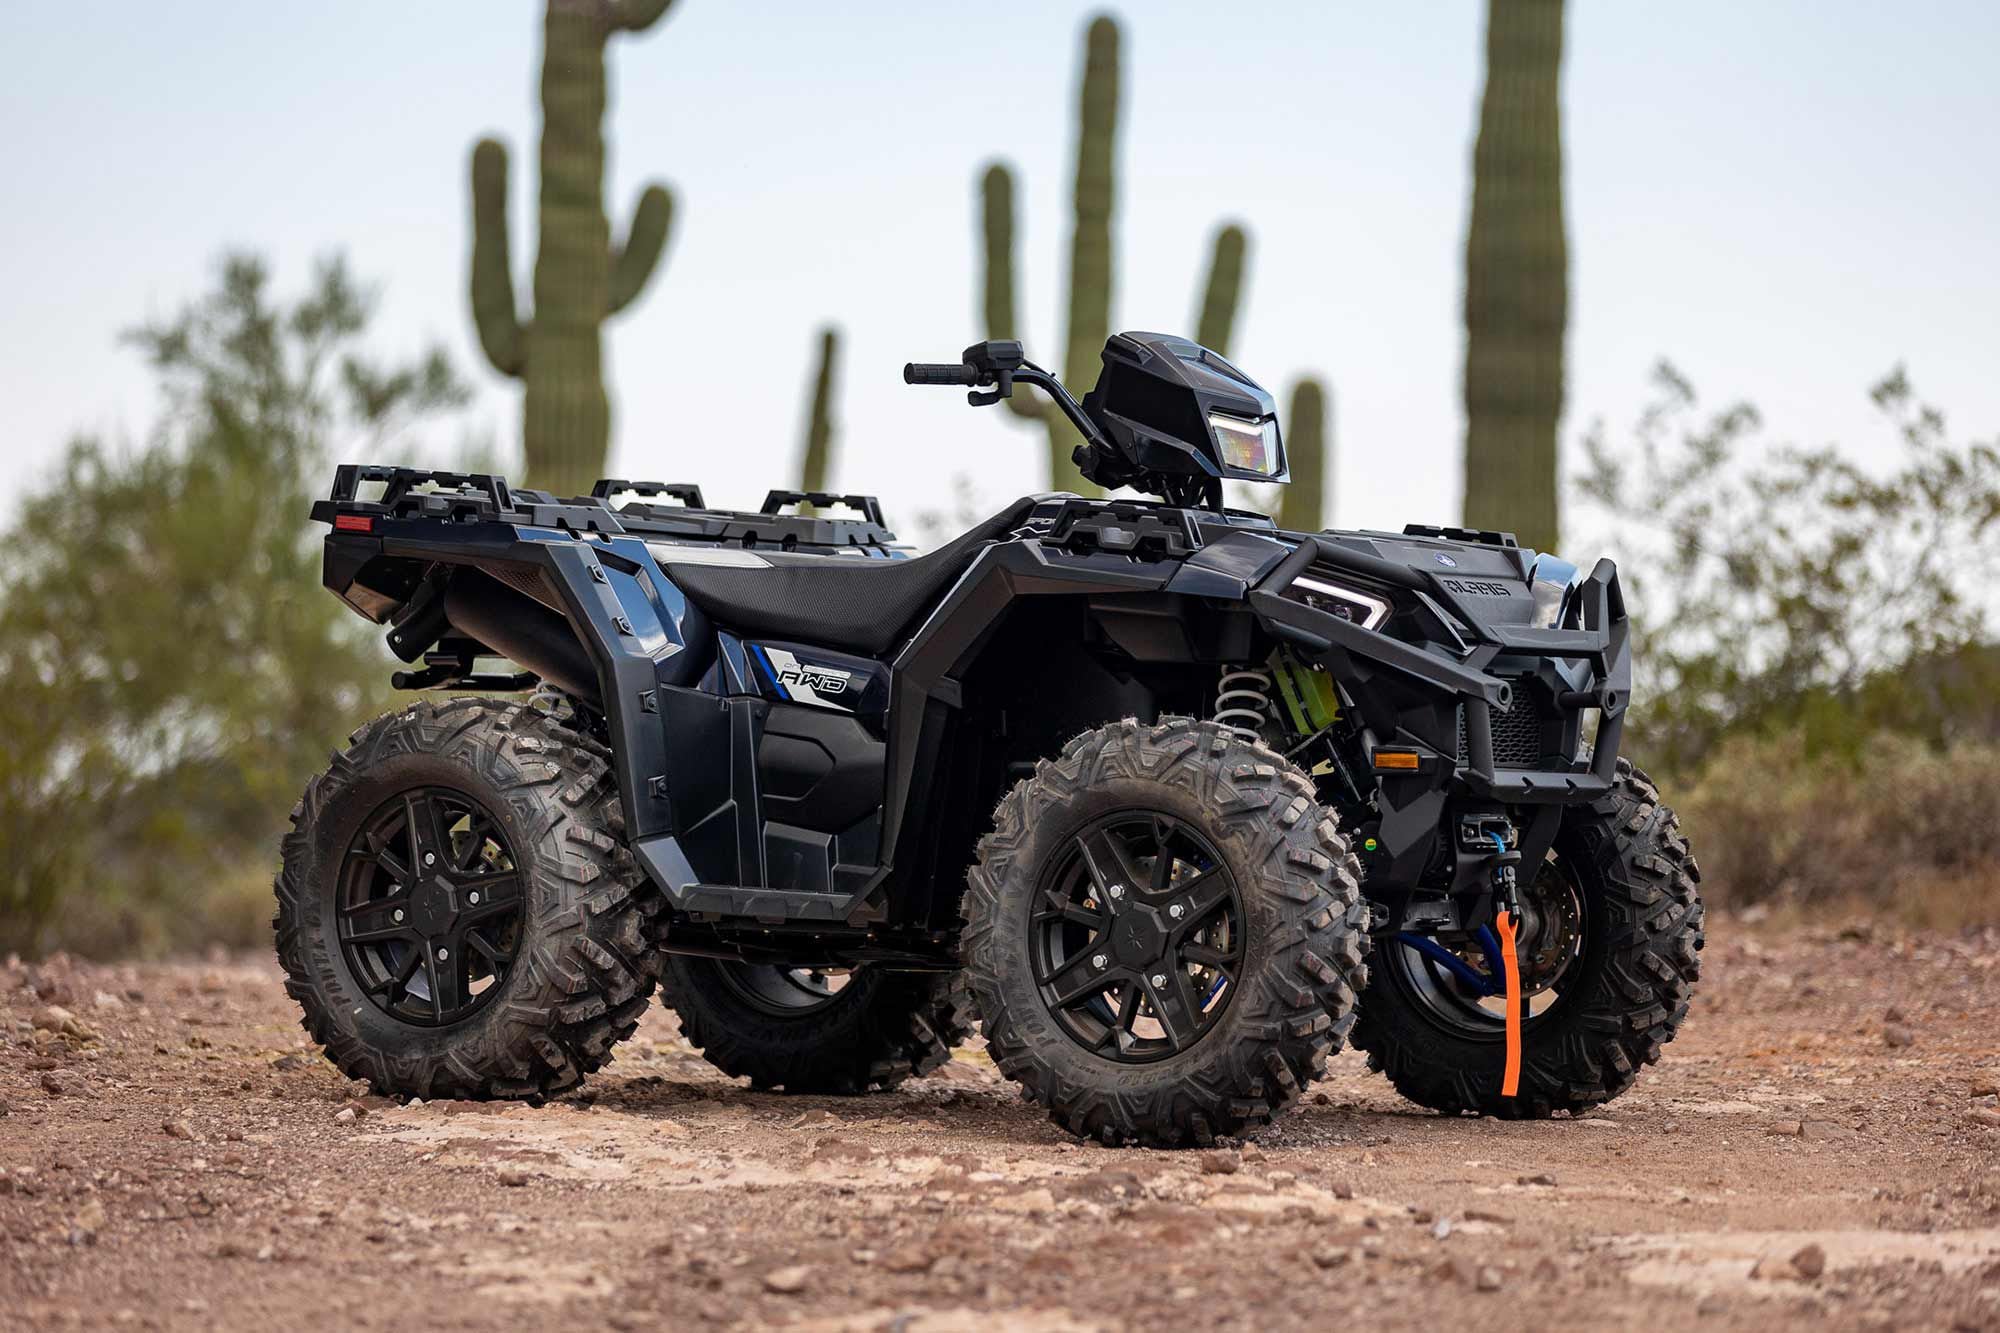 A 3,500-pound winch, aluminum wheels, and rugged Duro Power Grip V2 tires are just a few premium features on this Sportsman.